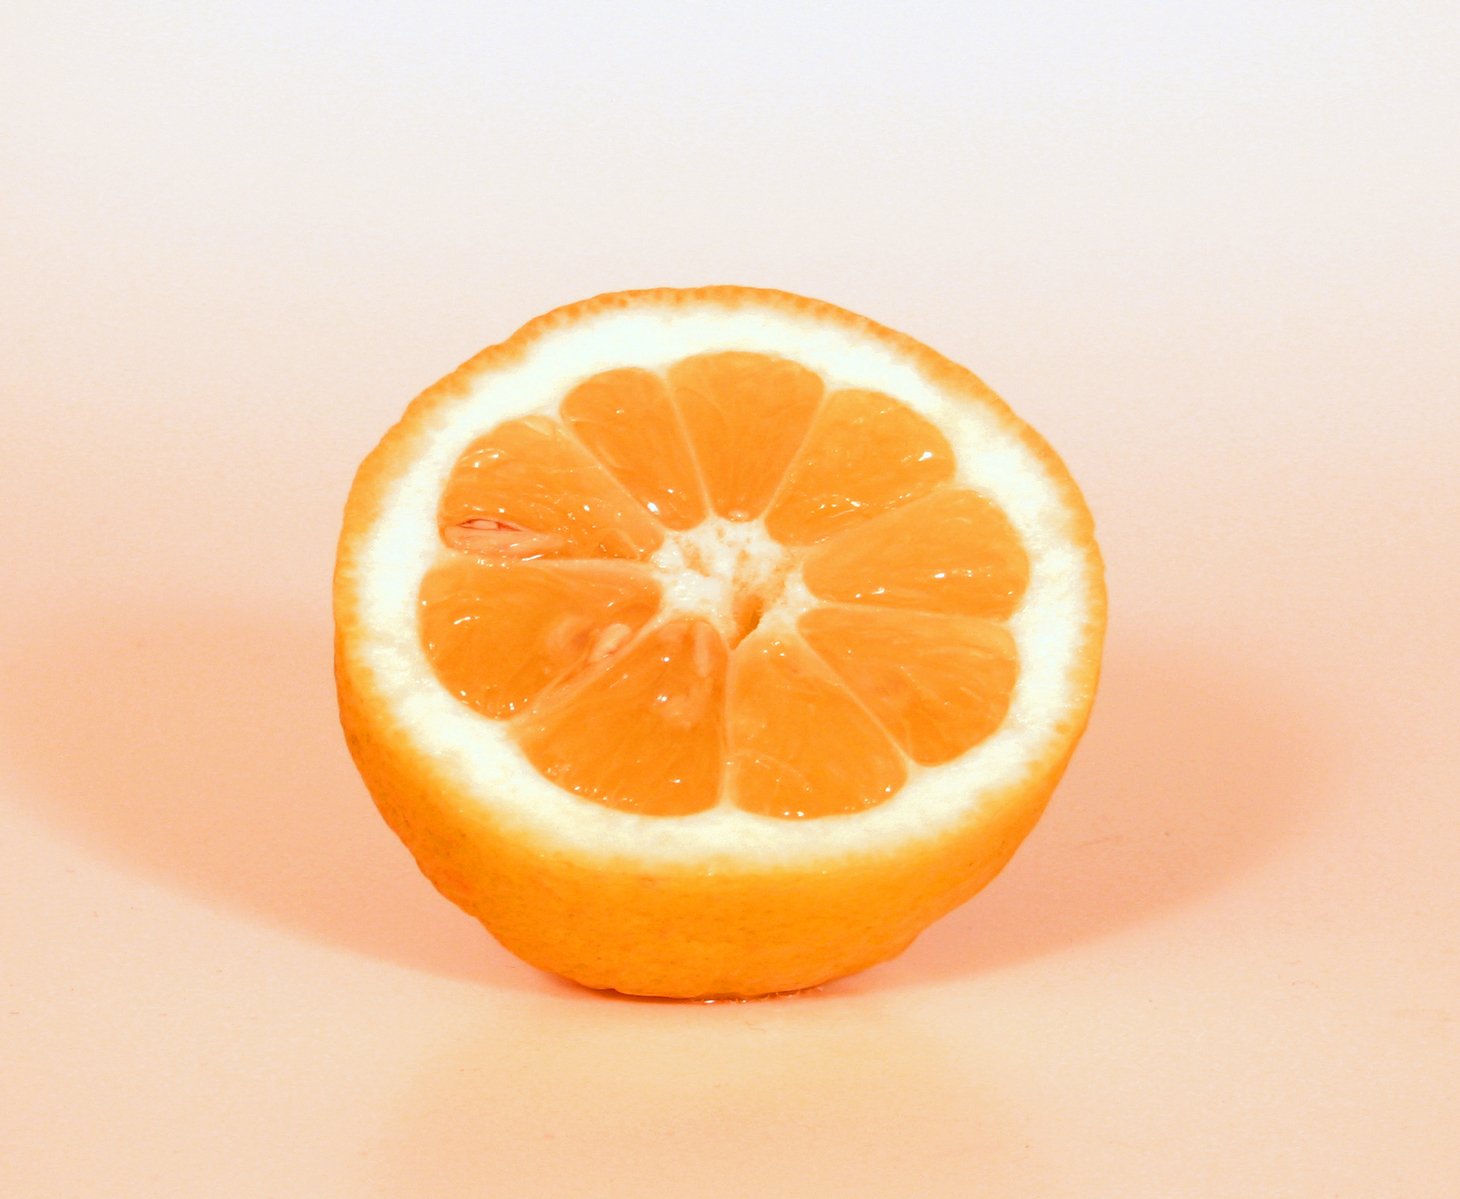 a half of an orange sitting on top of a white surface